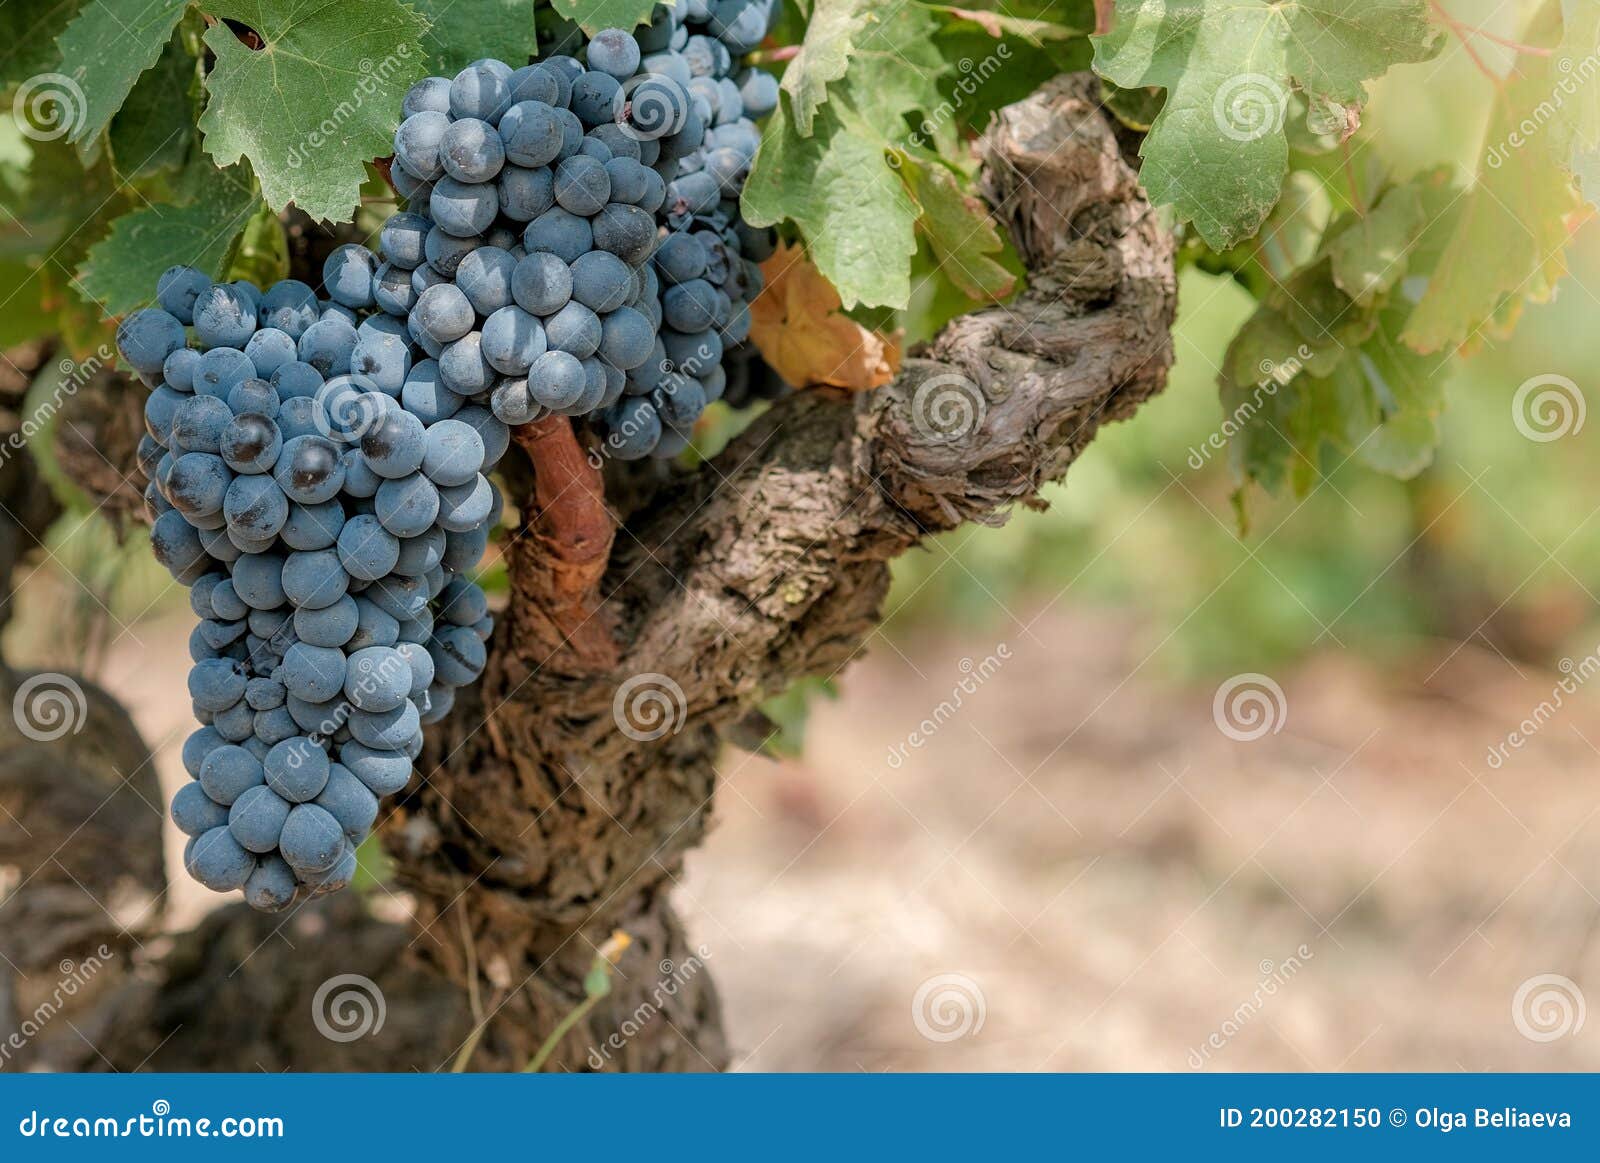 Grapevine with Berries and Grape Leaves on Old Vine Trunk